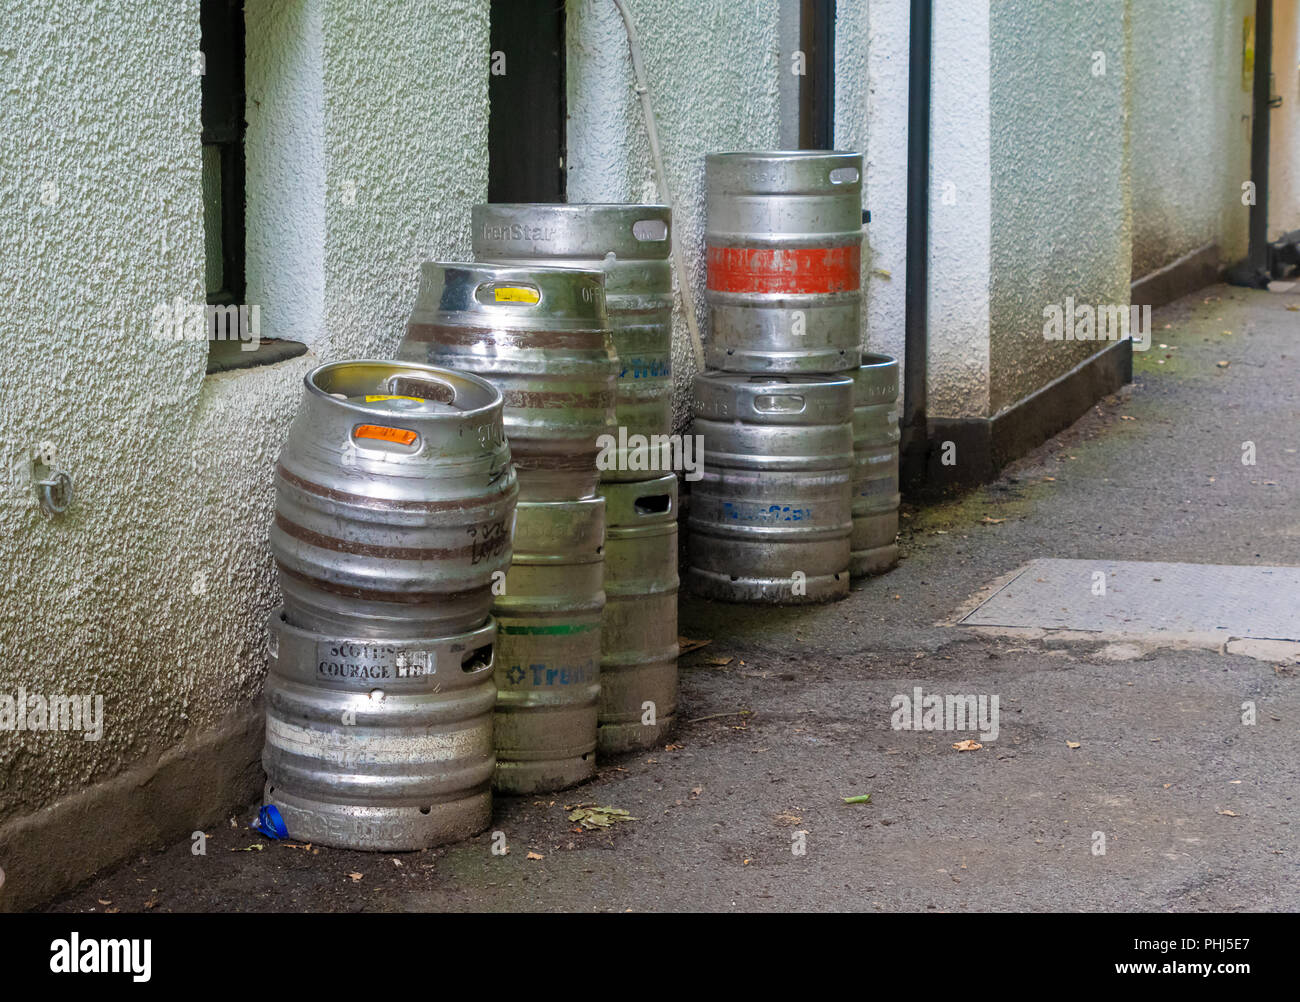 Download Beer Keg High Resolution Stock Photography And Images Alamy Yellowimages Mockups